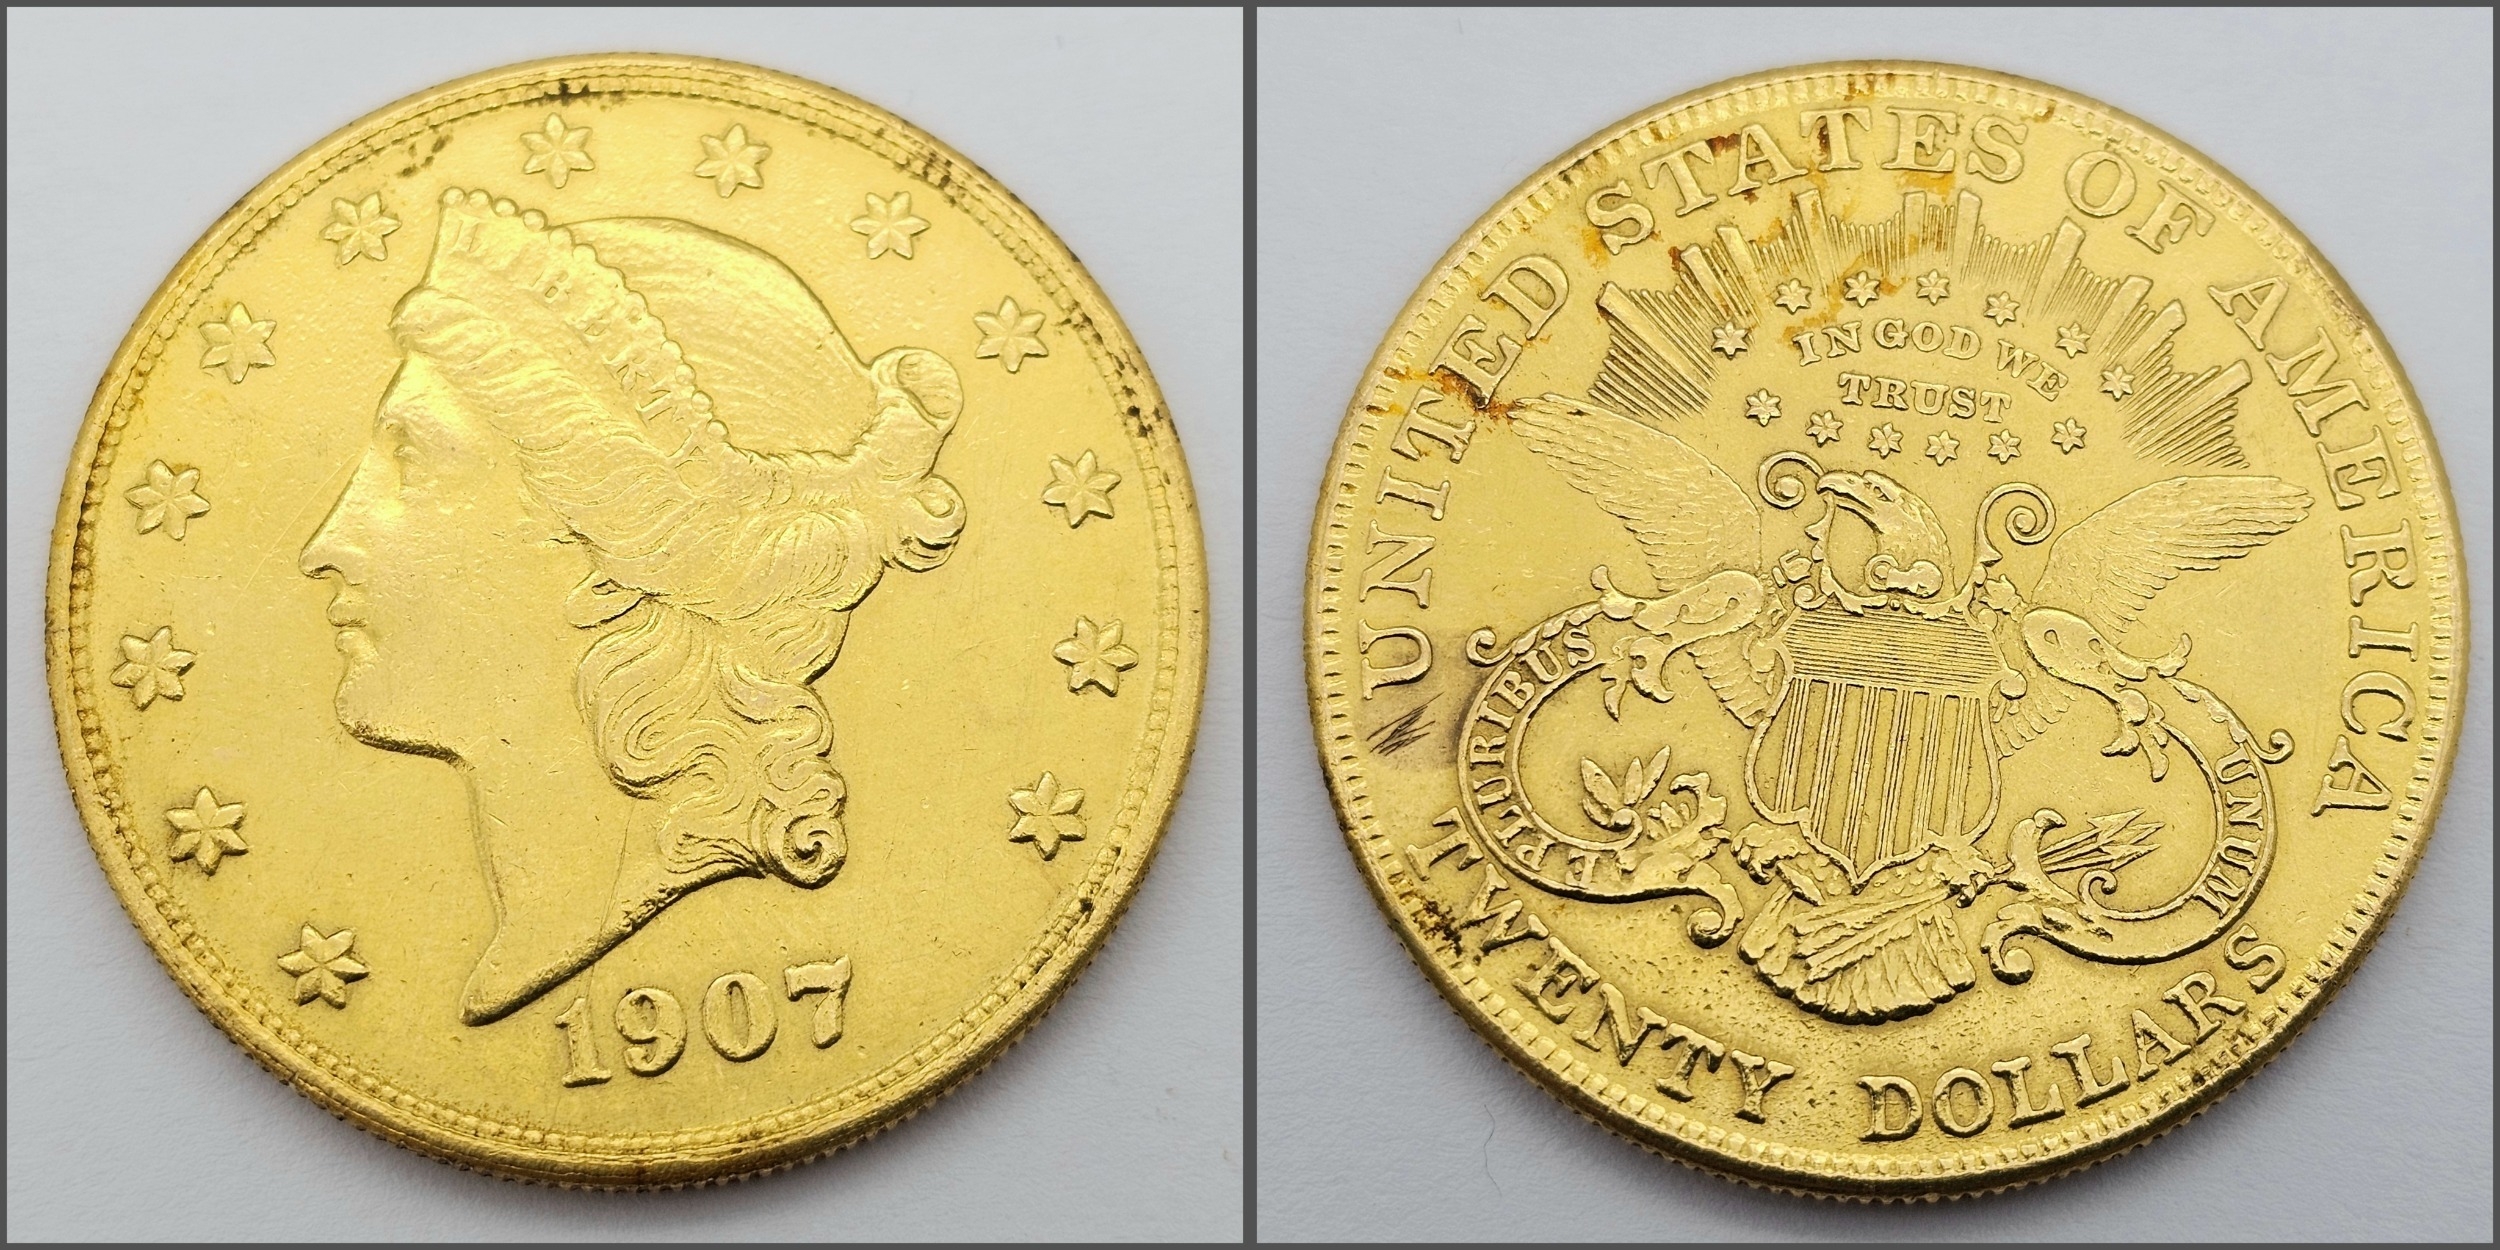 A $20 GOLD LIBERTY COIN DATED 1907 AND WEIGHING 33.43gms THIS COIN IS IN VERY GOOD CONDITION